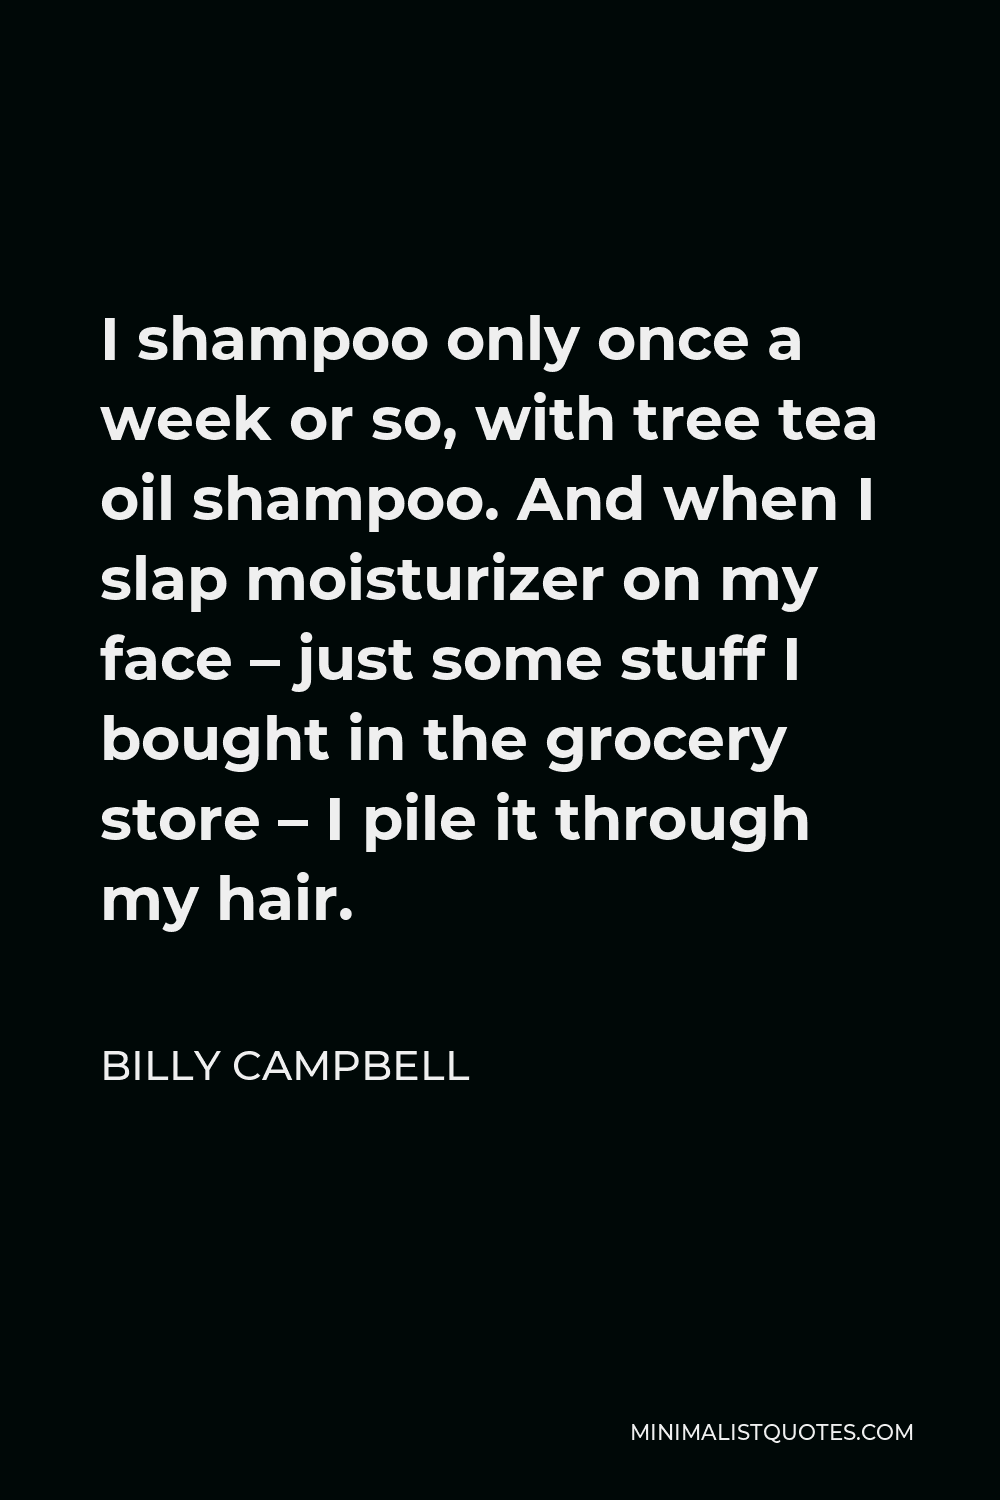 Billy Campbell Quote - I shampoo only once a week or so, with tree tea oil shampoo. And when I slap moisturizer on my face – just some stuff I bought in the grocery store – I pile it through my hair.